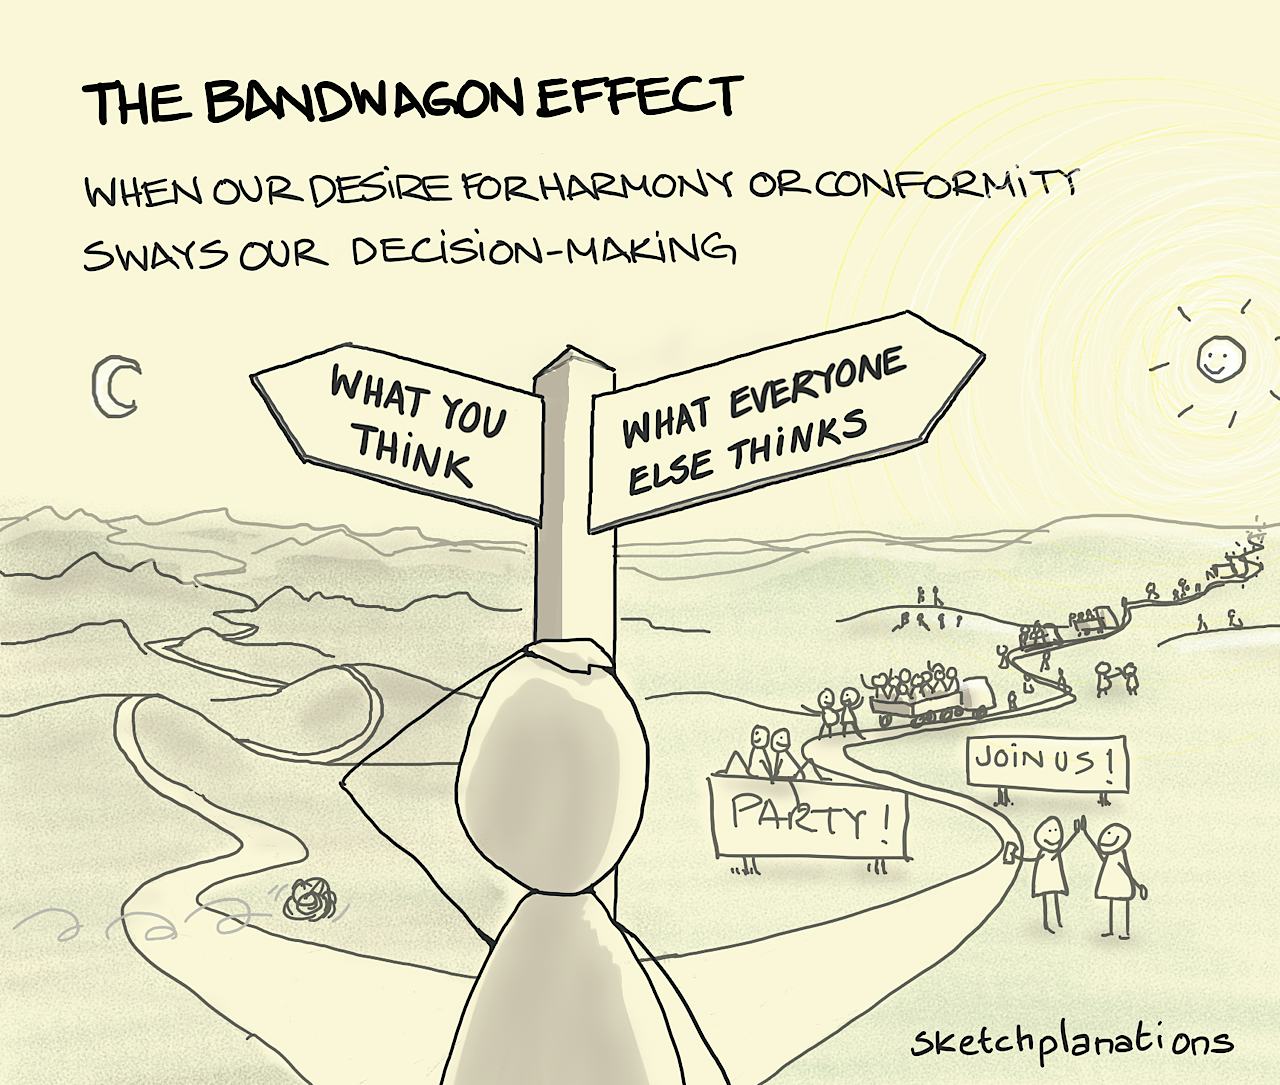 The bandwagon effect: someone struggles to decide at a path forking between a long empty road of 'what they think' and one full of people and fun of 'what everyone thinks'